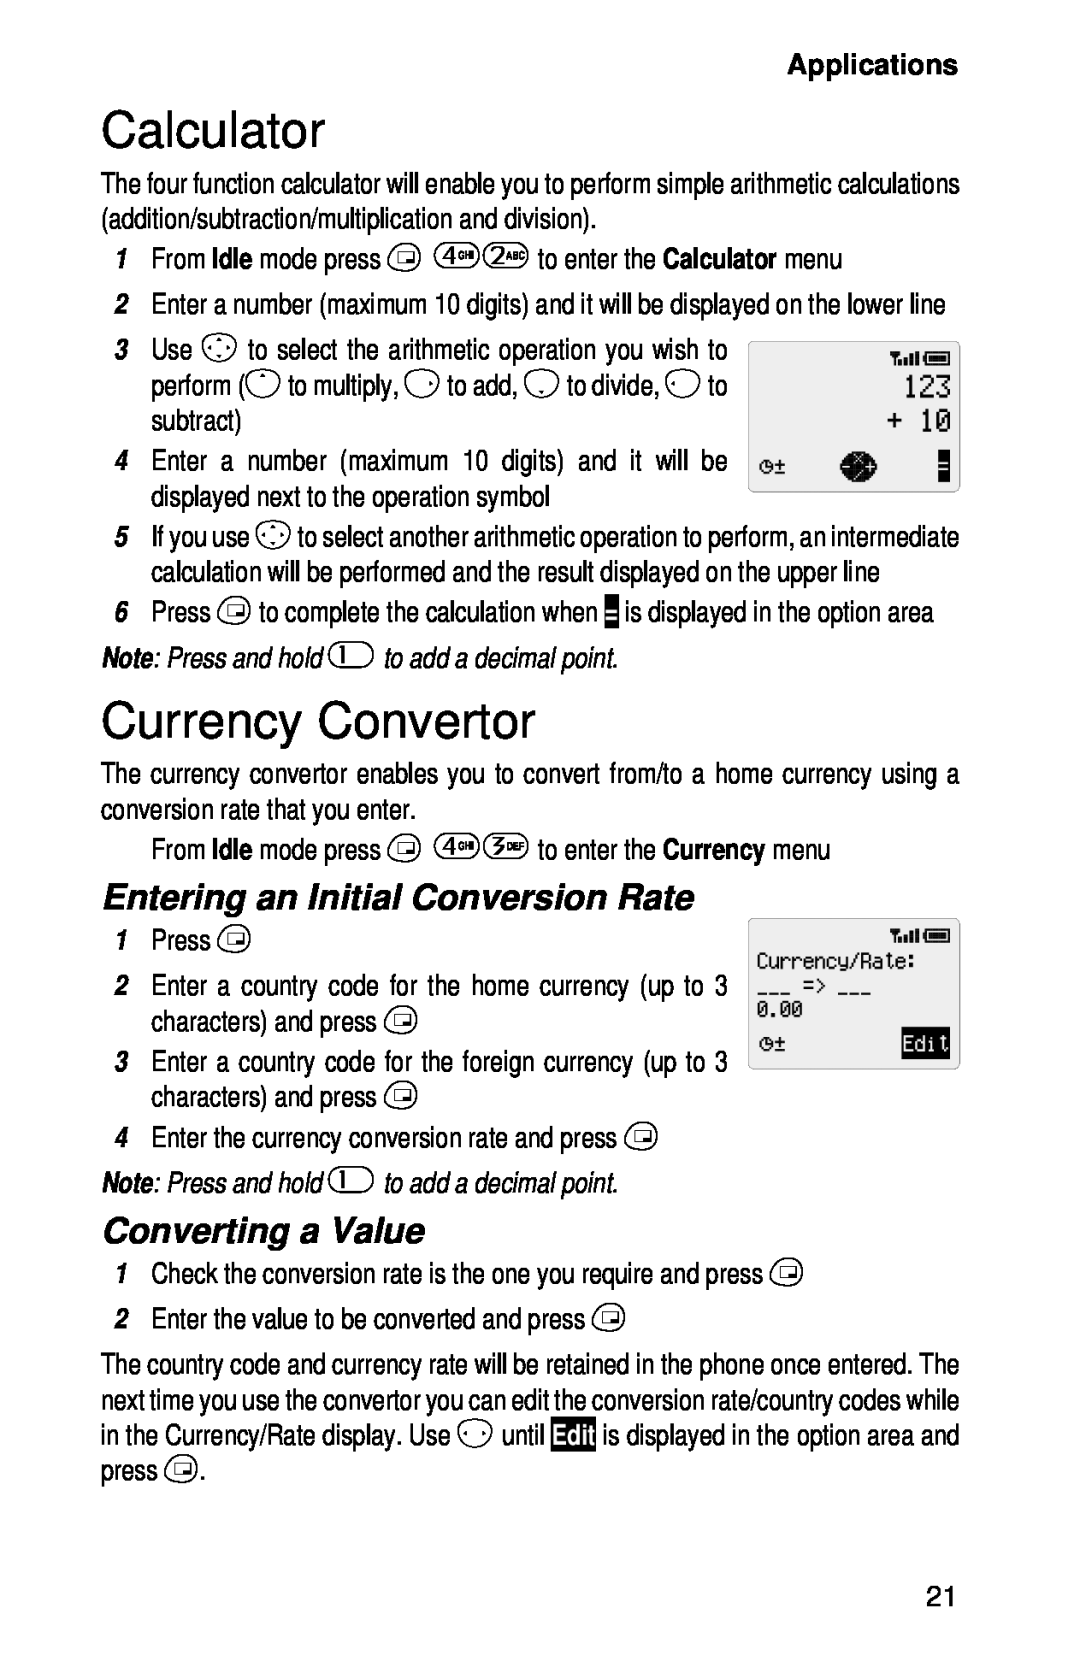 Panasonic EB-GD52 Calculator, Currency Convertor, Entering an Initial Conversion Rate, Converting a Value, Applications 